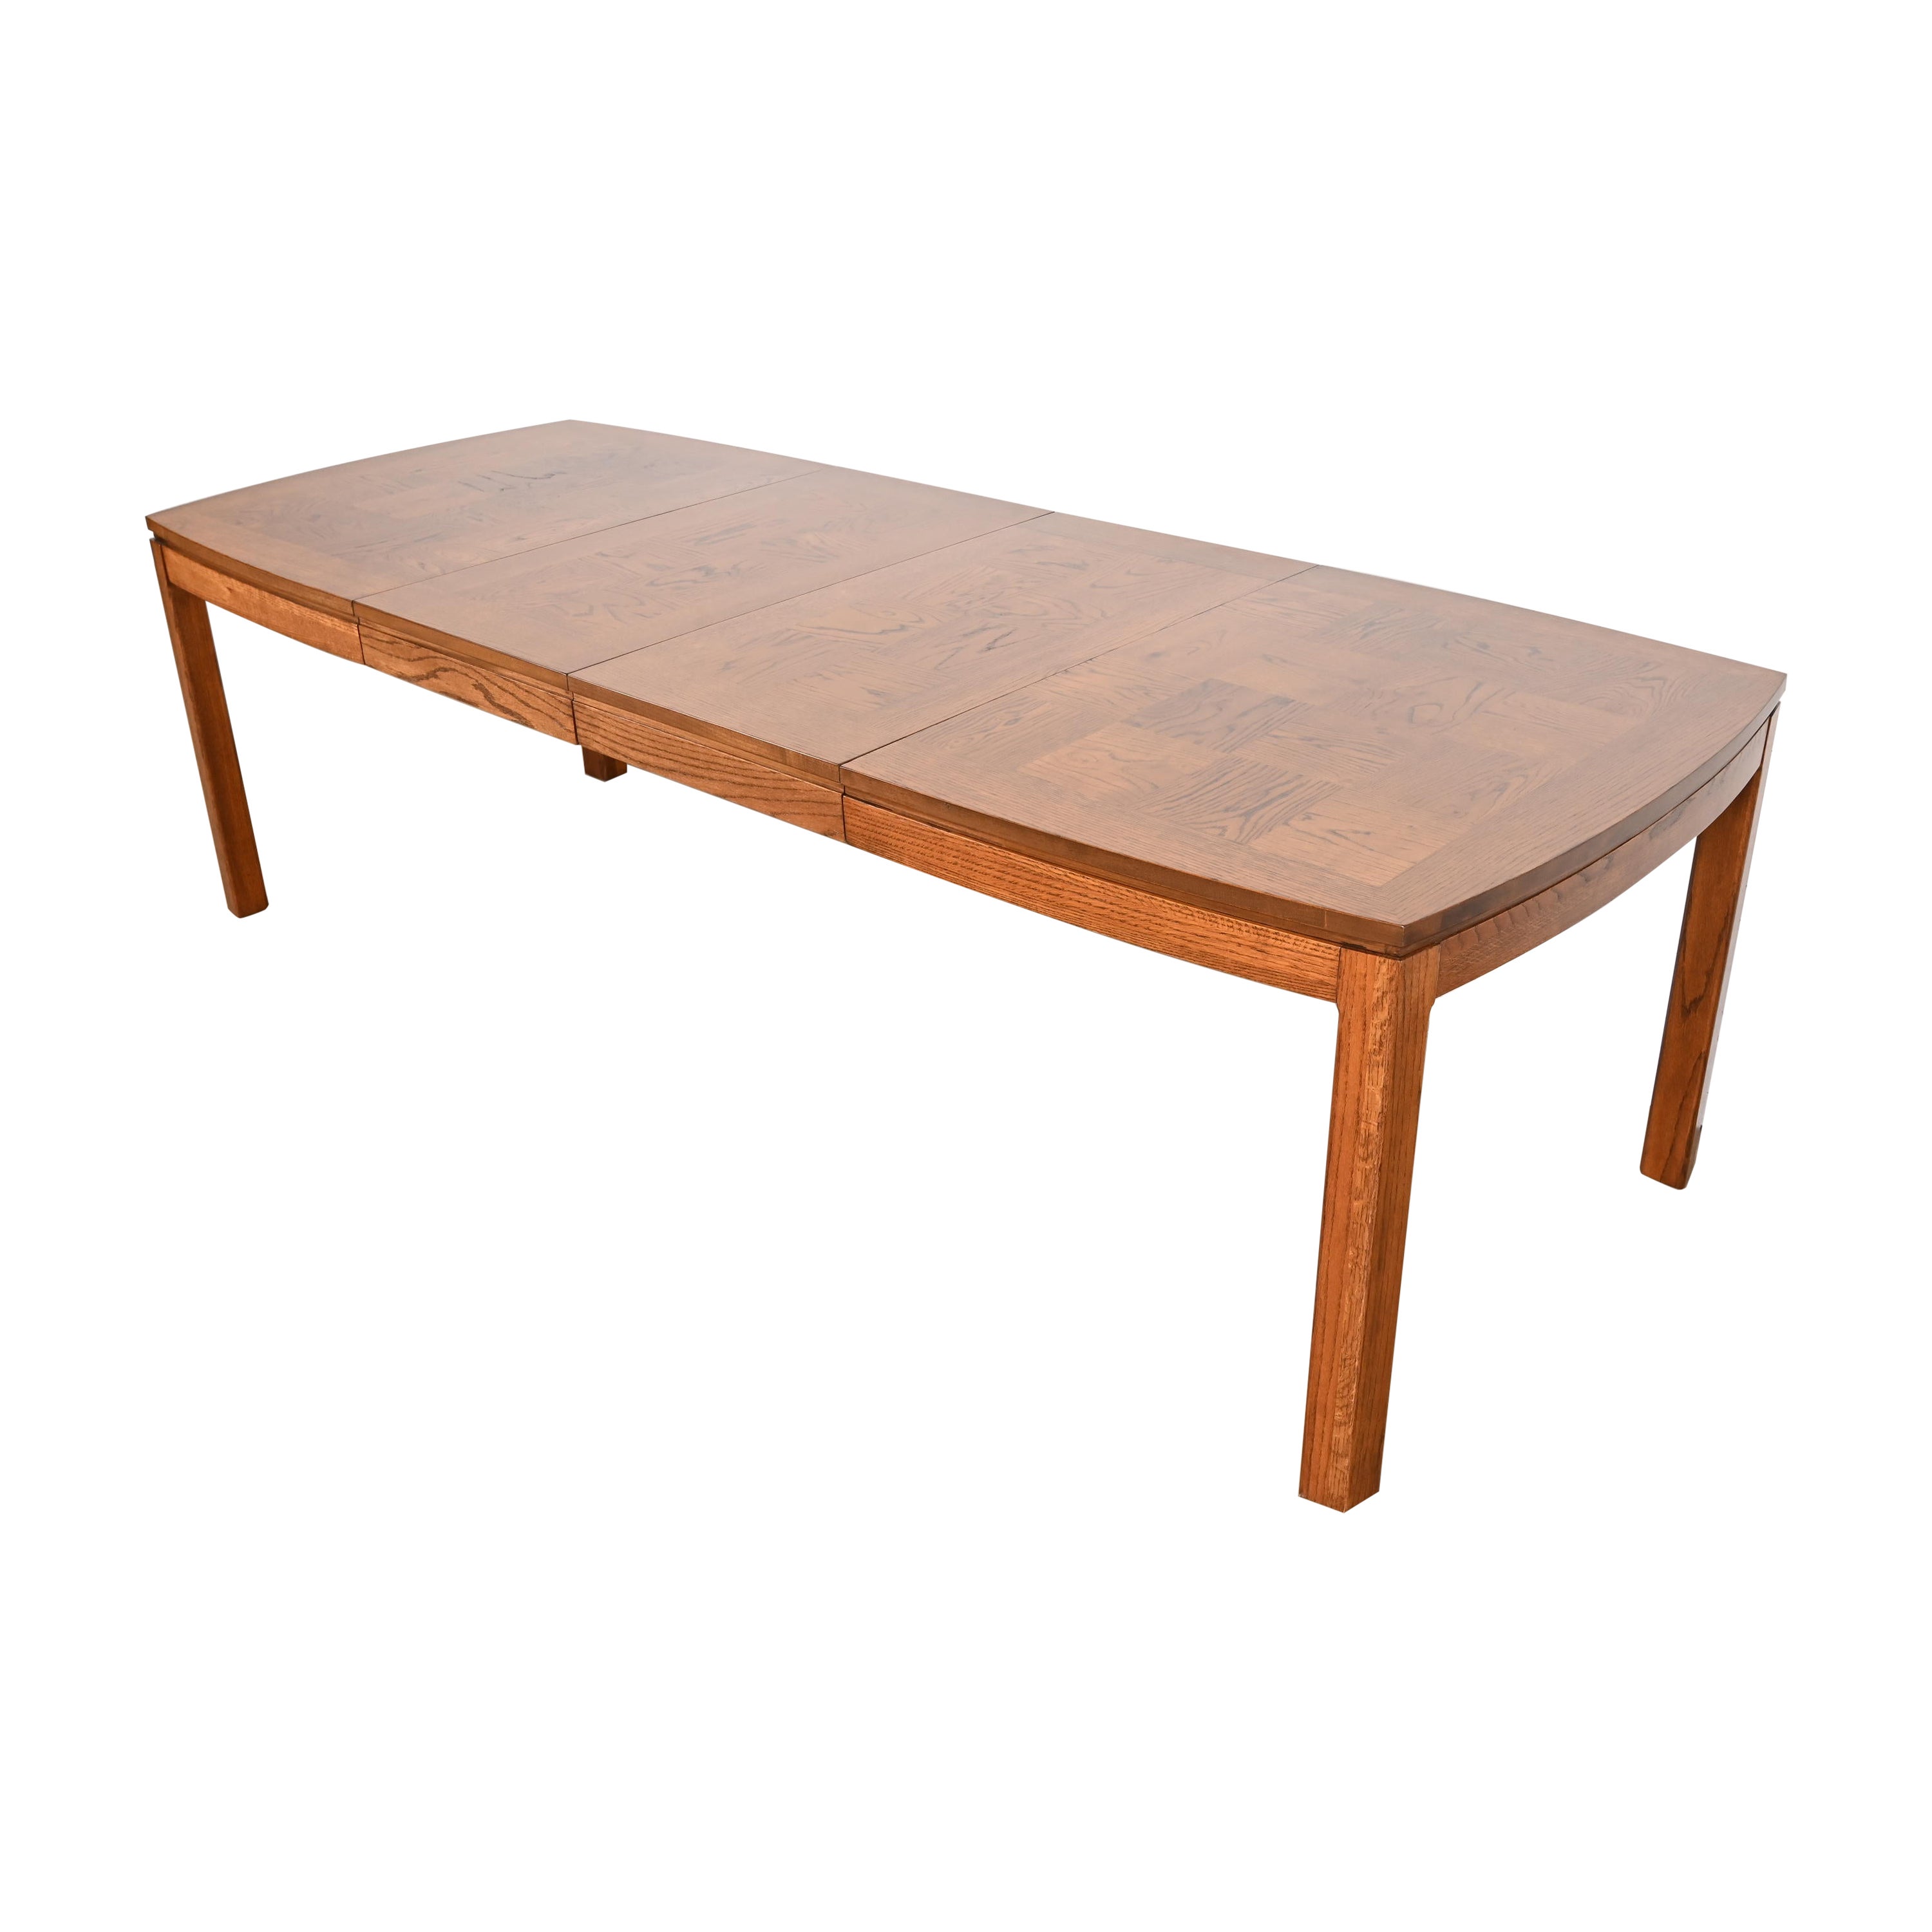 Thomasville Mid-Century Modern Patchwork Oak Parsons Dining Table, Refinished For Sale